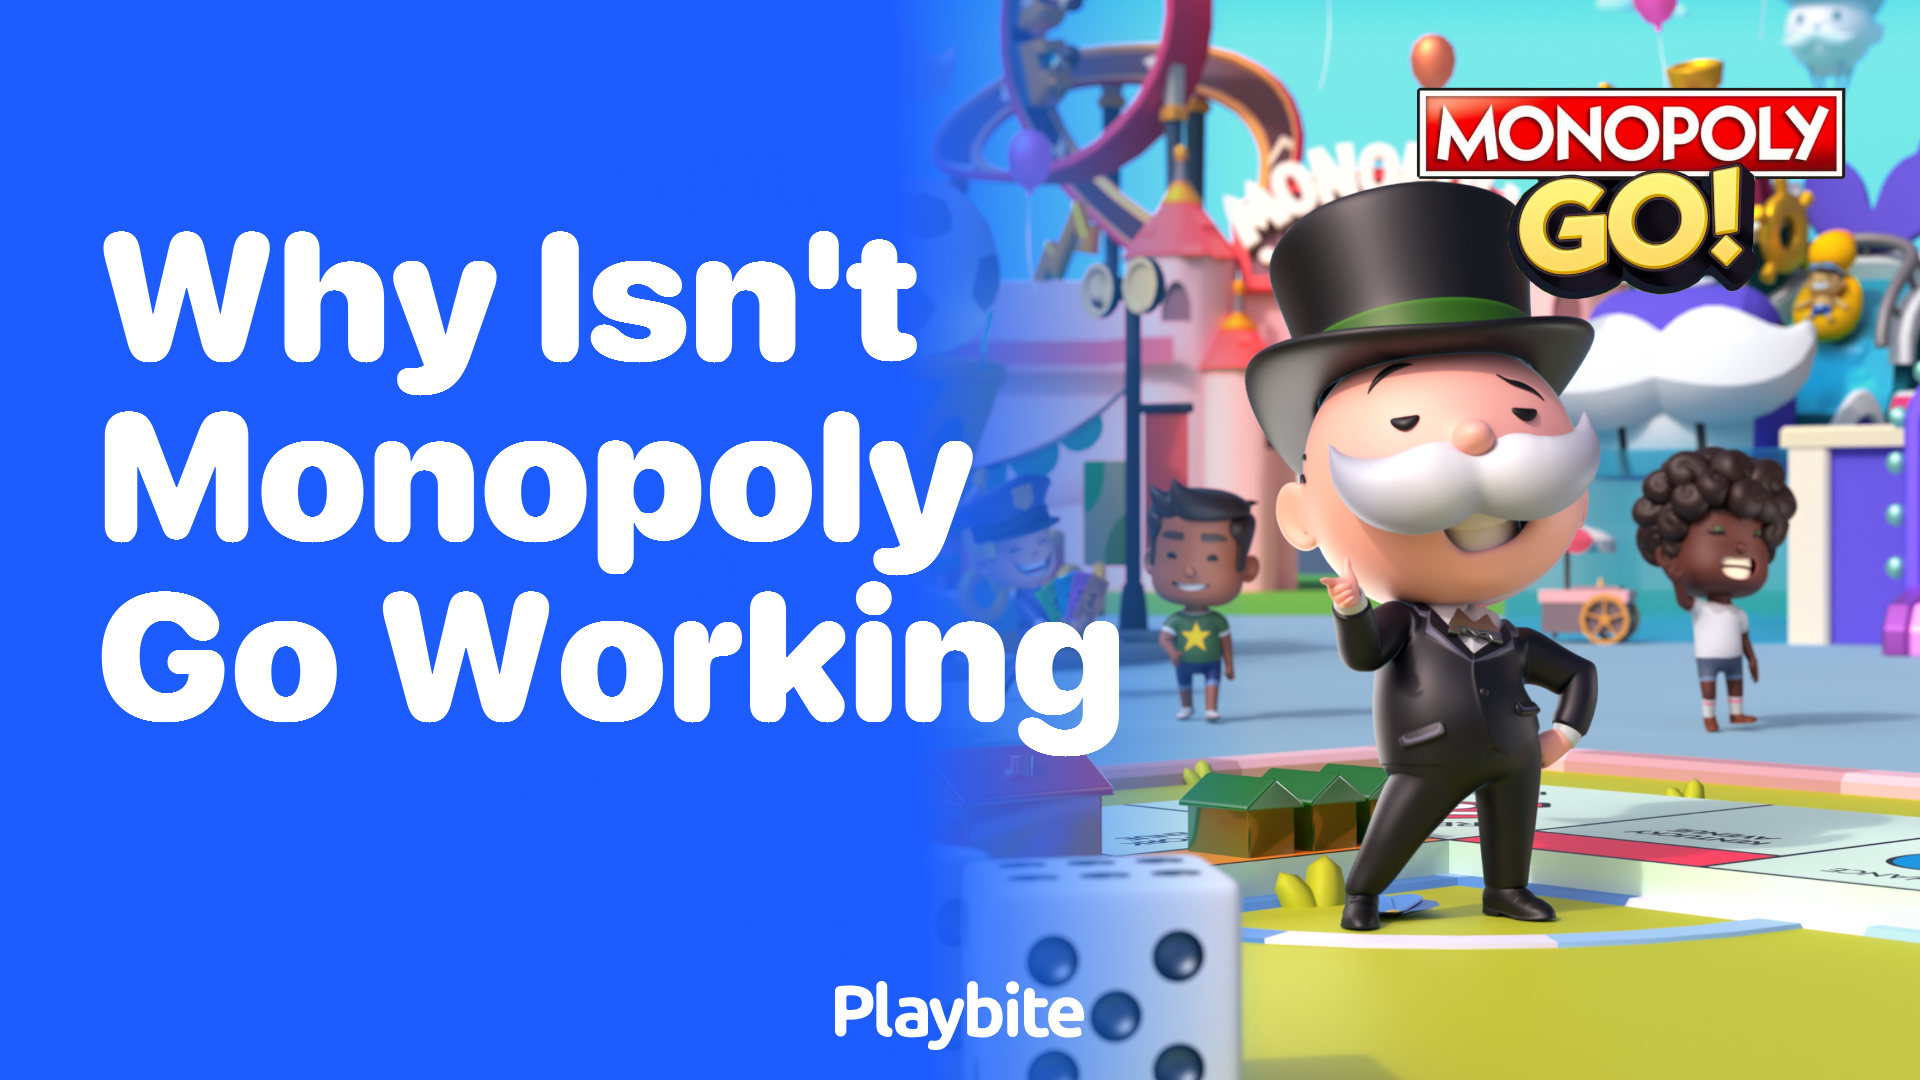 Why Isn&#8217;t Monopoly Go Working? Let&#8217;s Find Out!